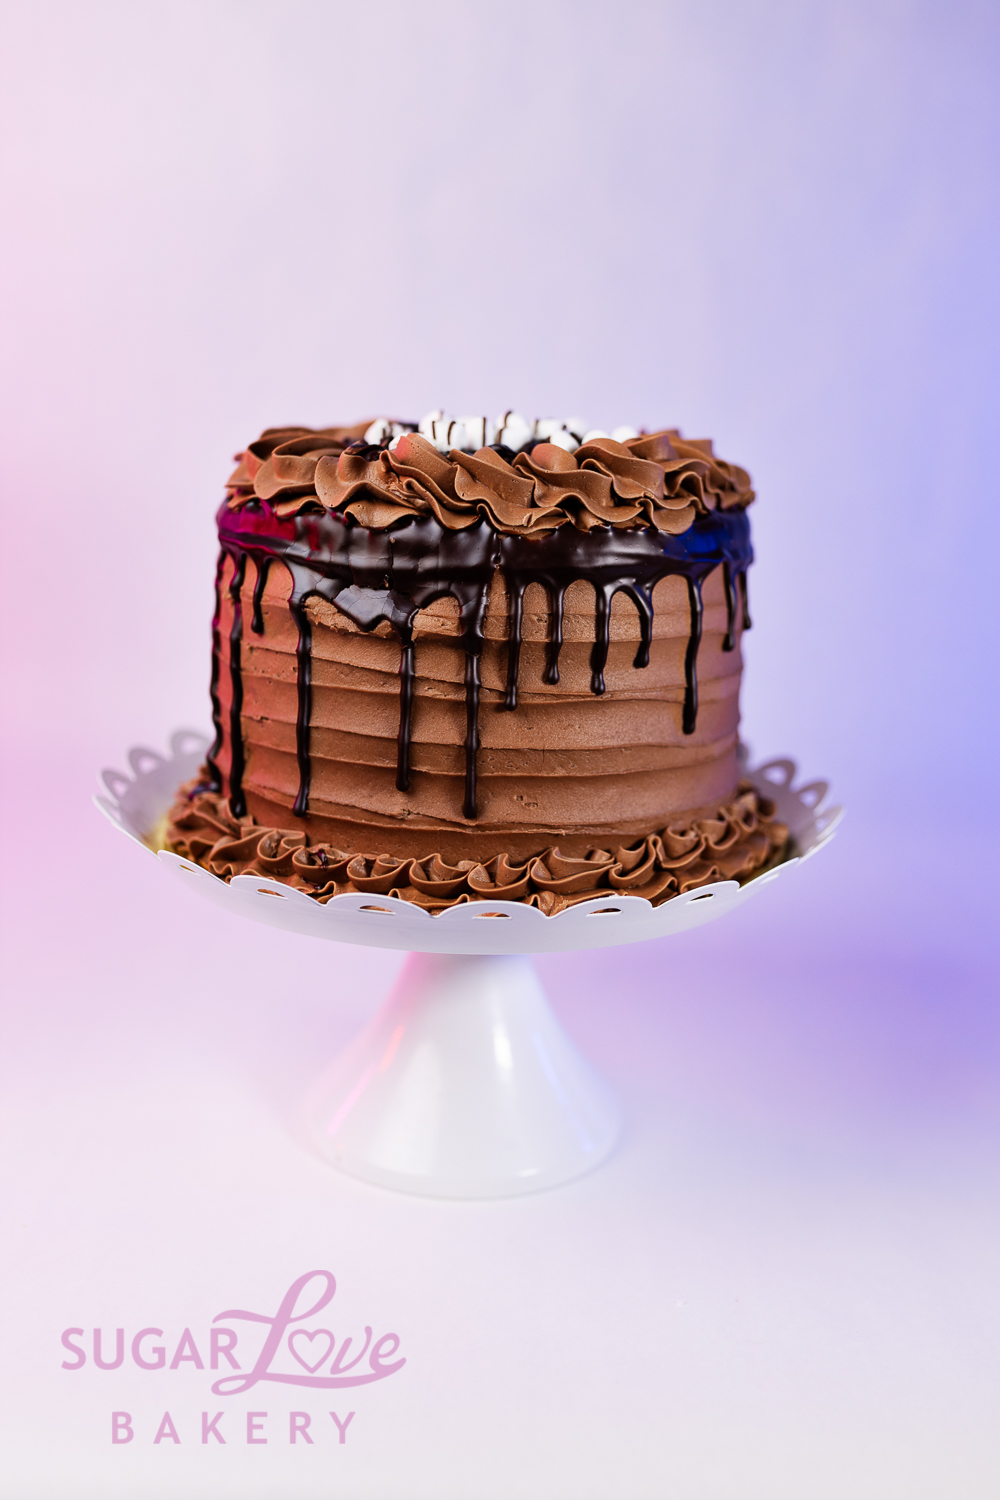 King of Road Cake | Cake World - Delicious Cakes for Every Occasion.